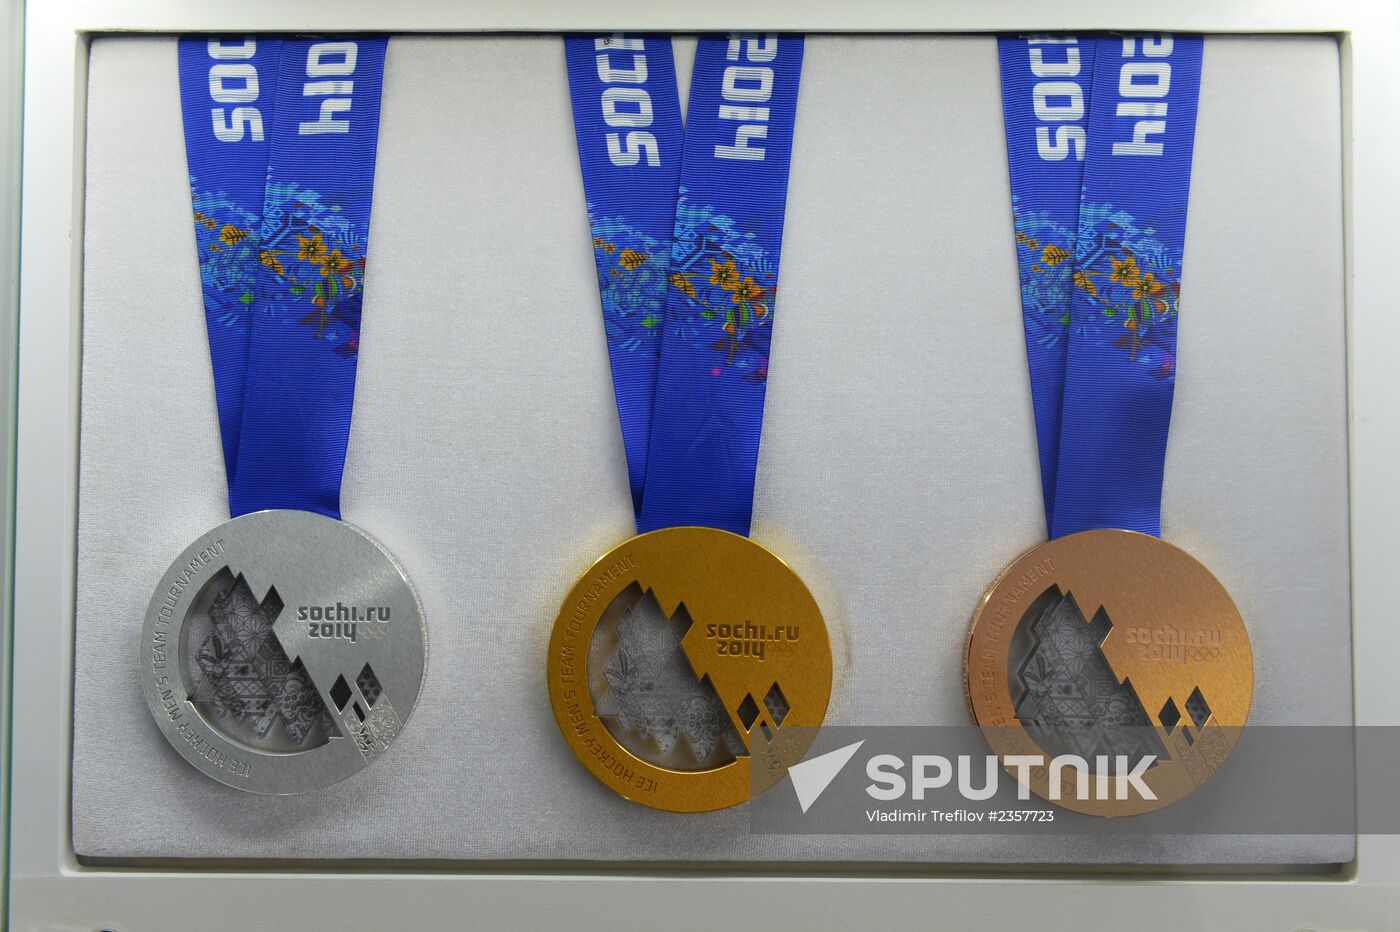 Olympic medals arrive in Sochi